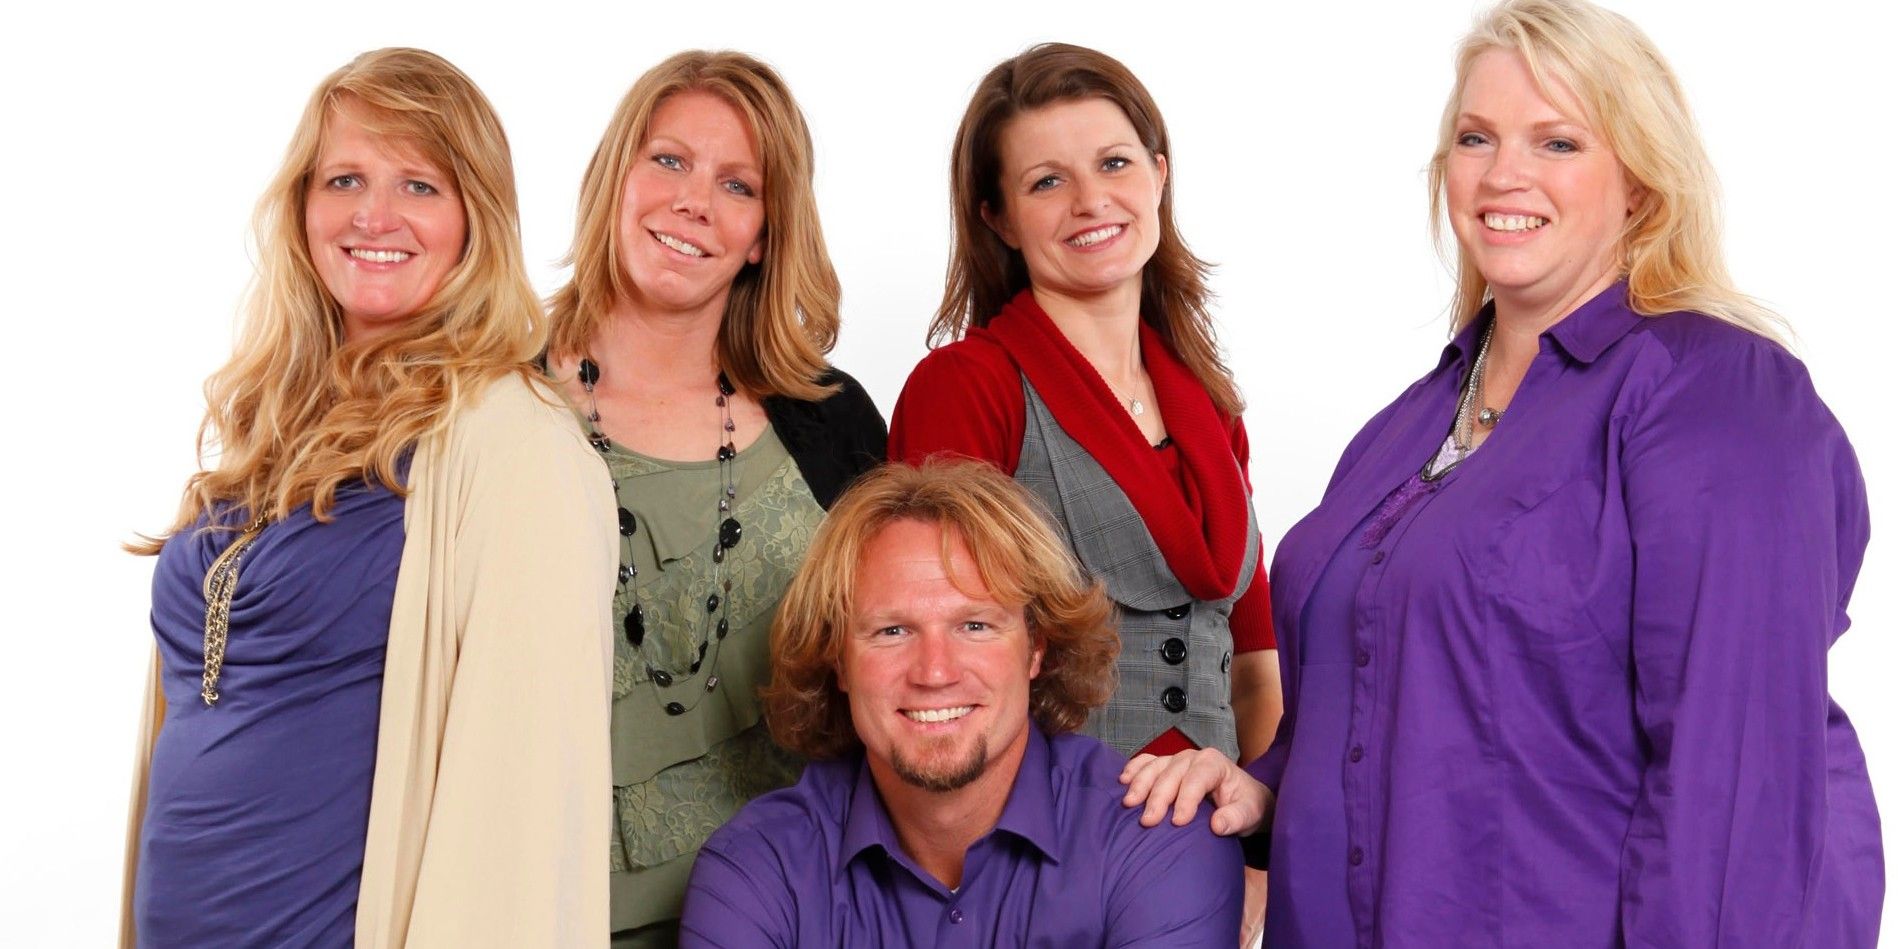 Sister current news wives about 'Sister Wives':